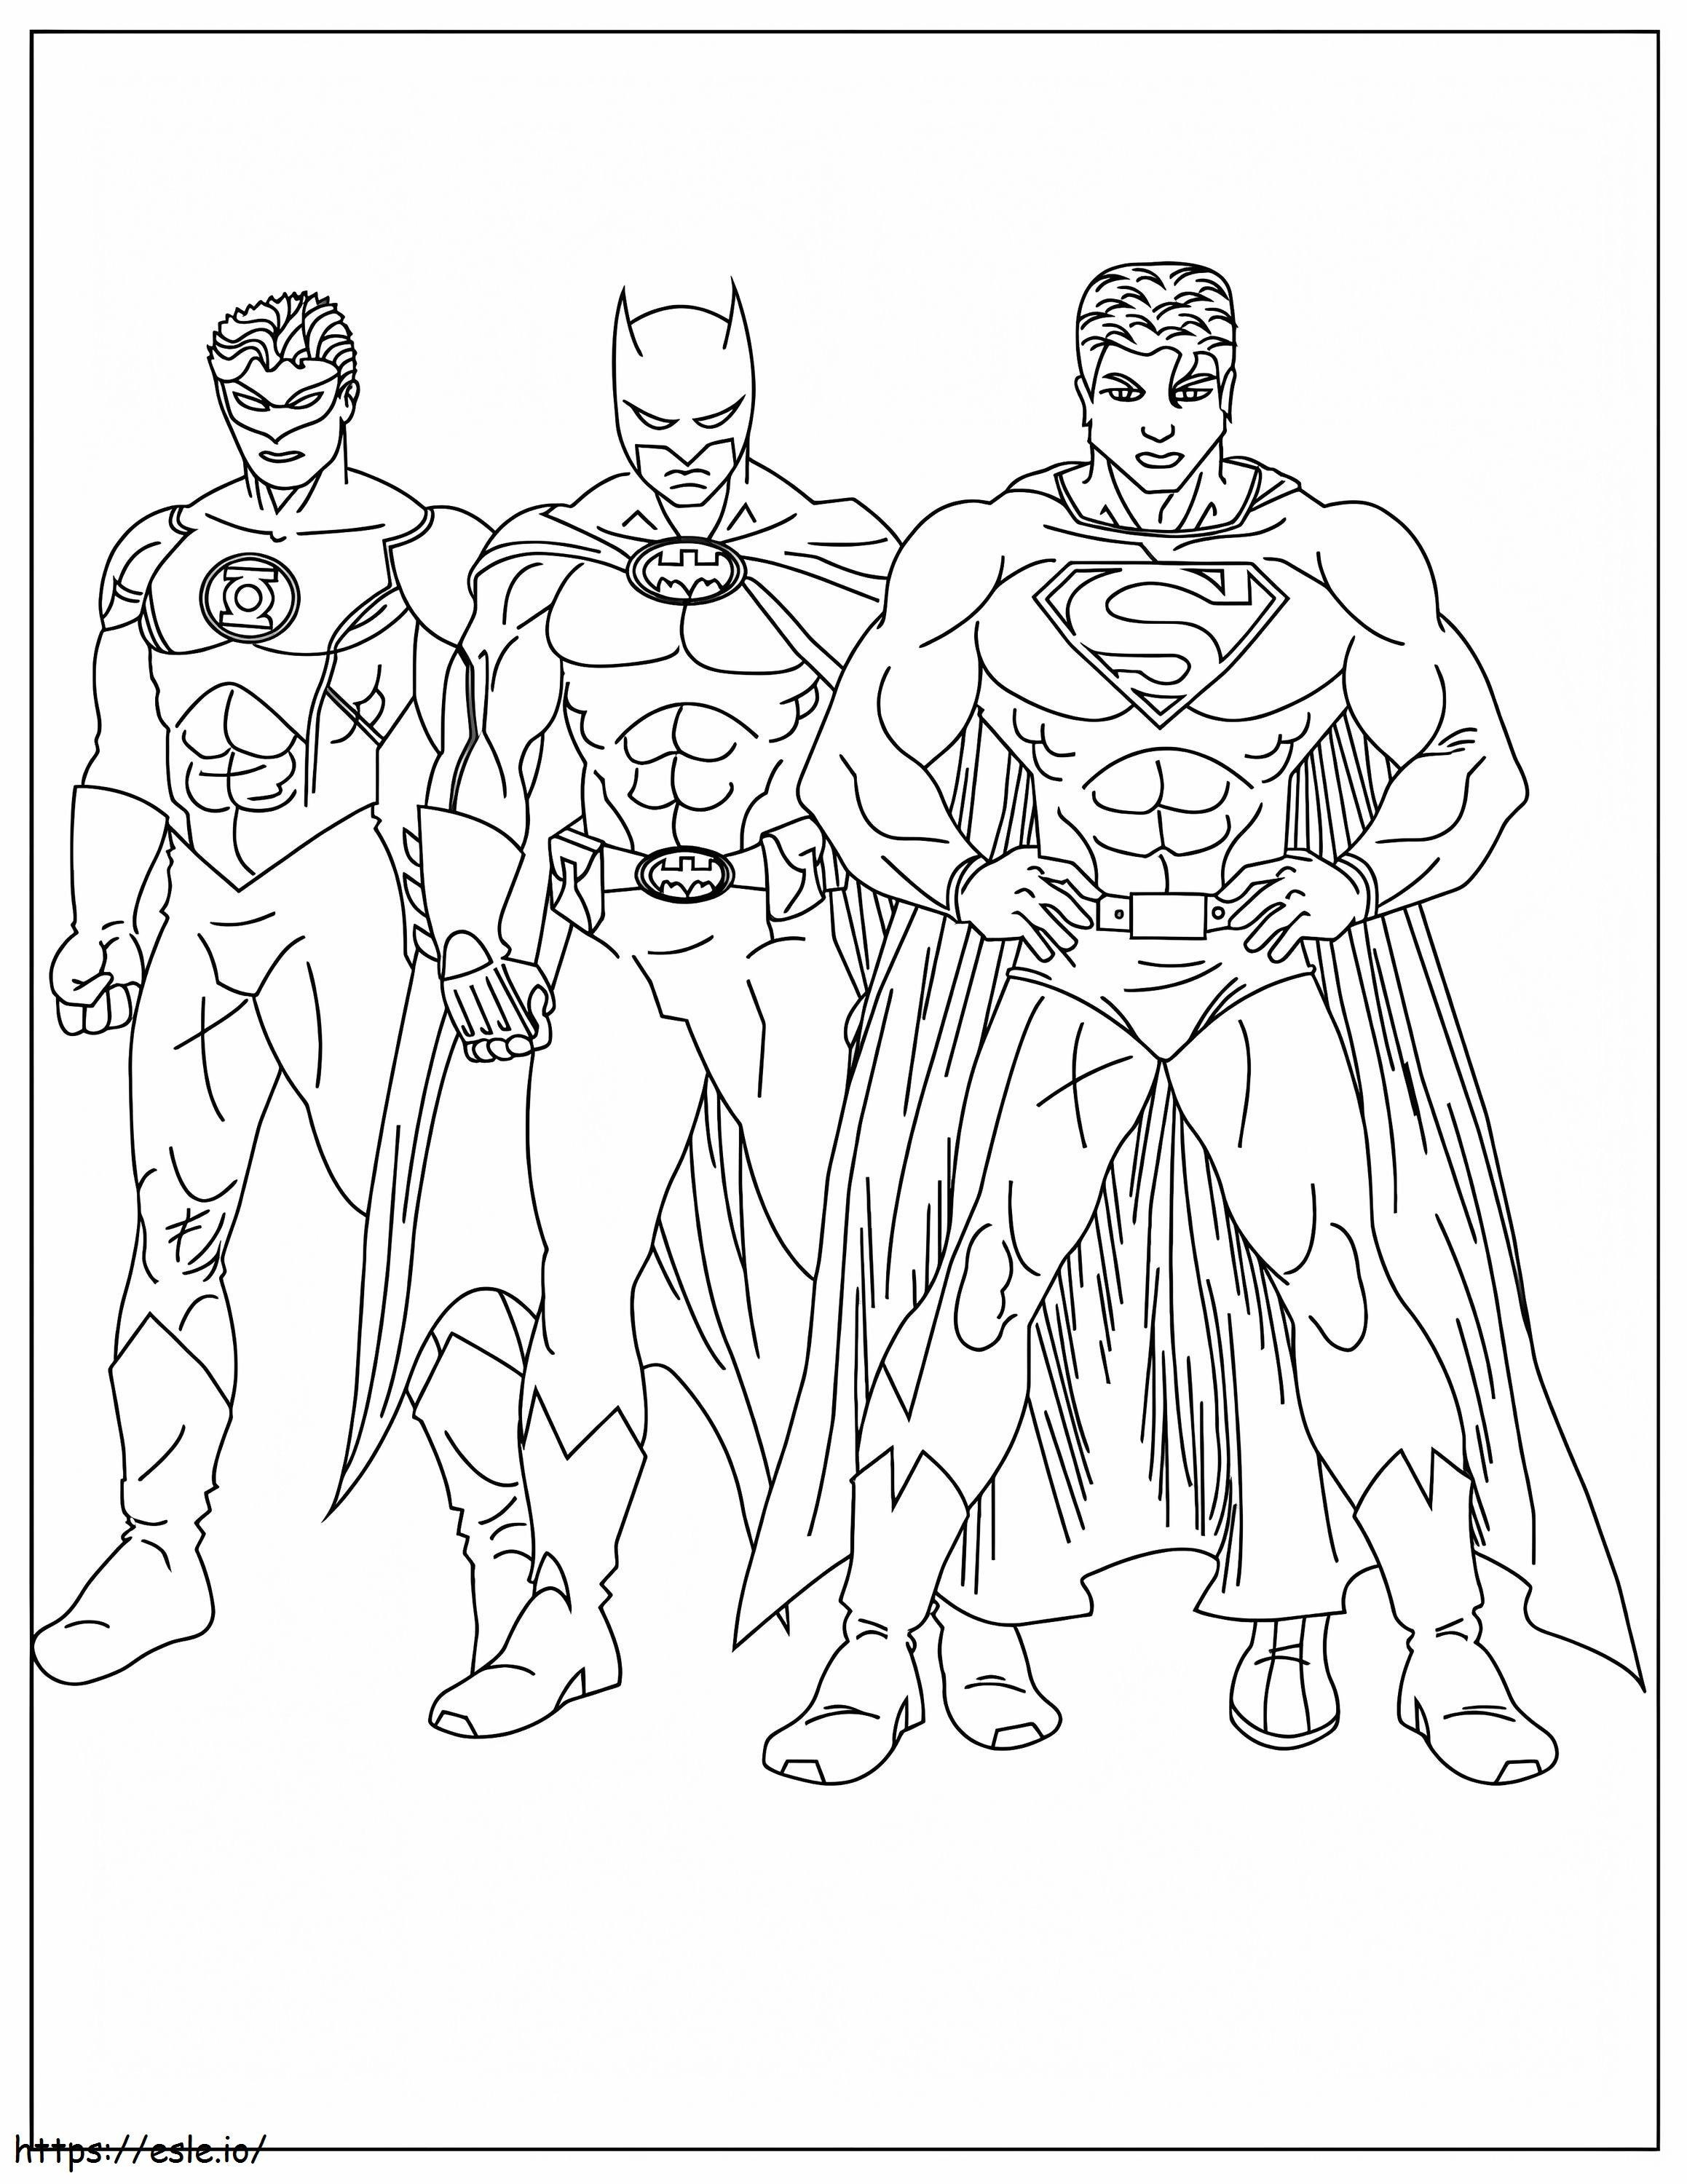 Cool Superman And Friends coloring page